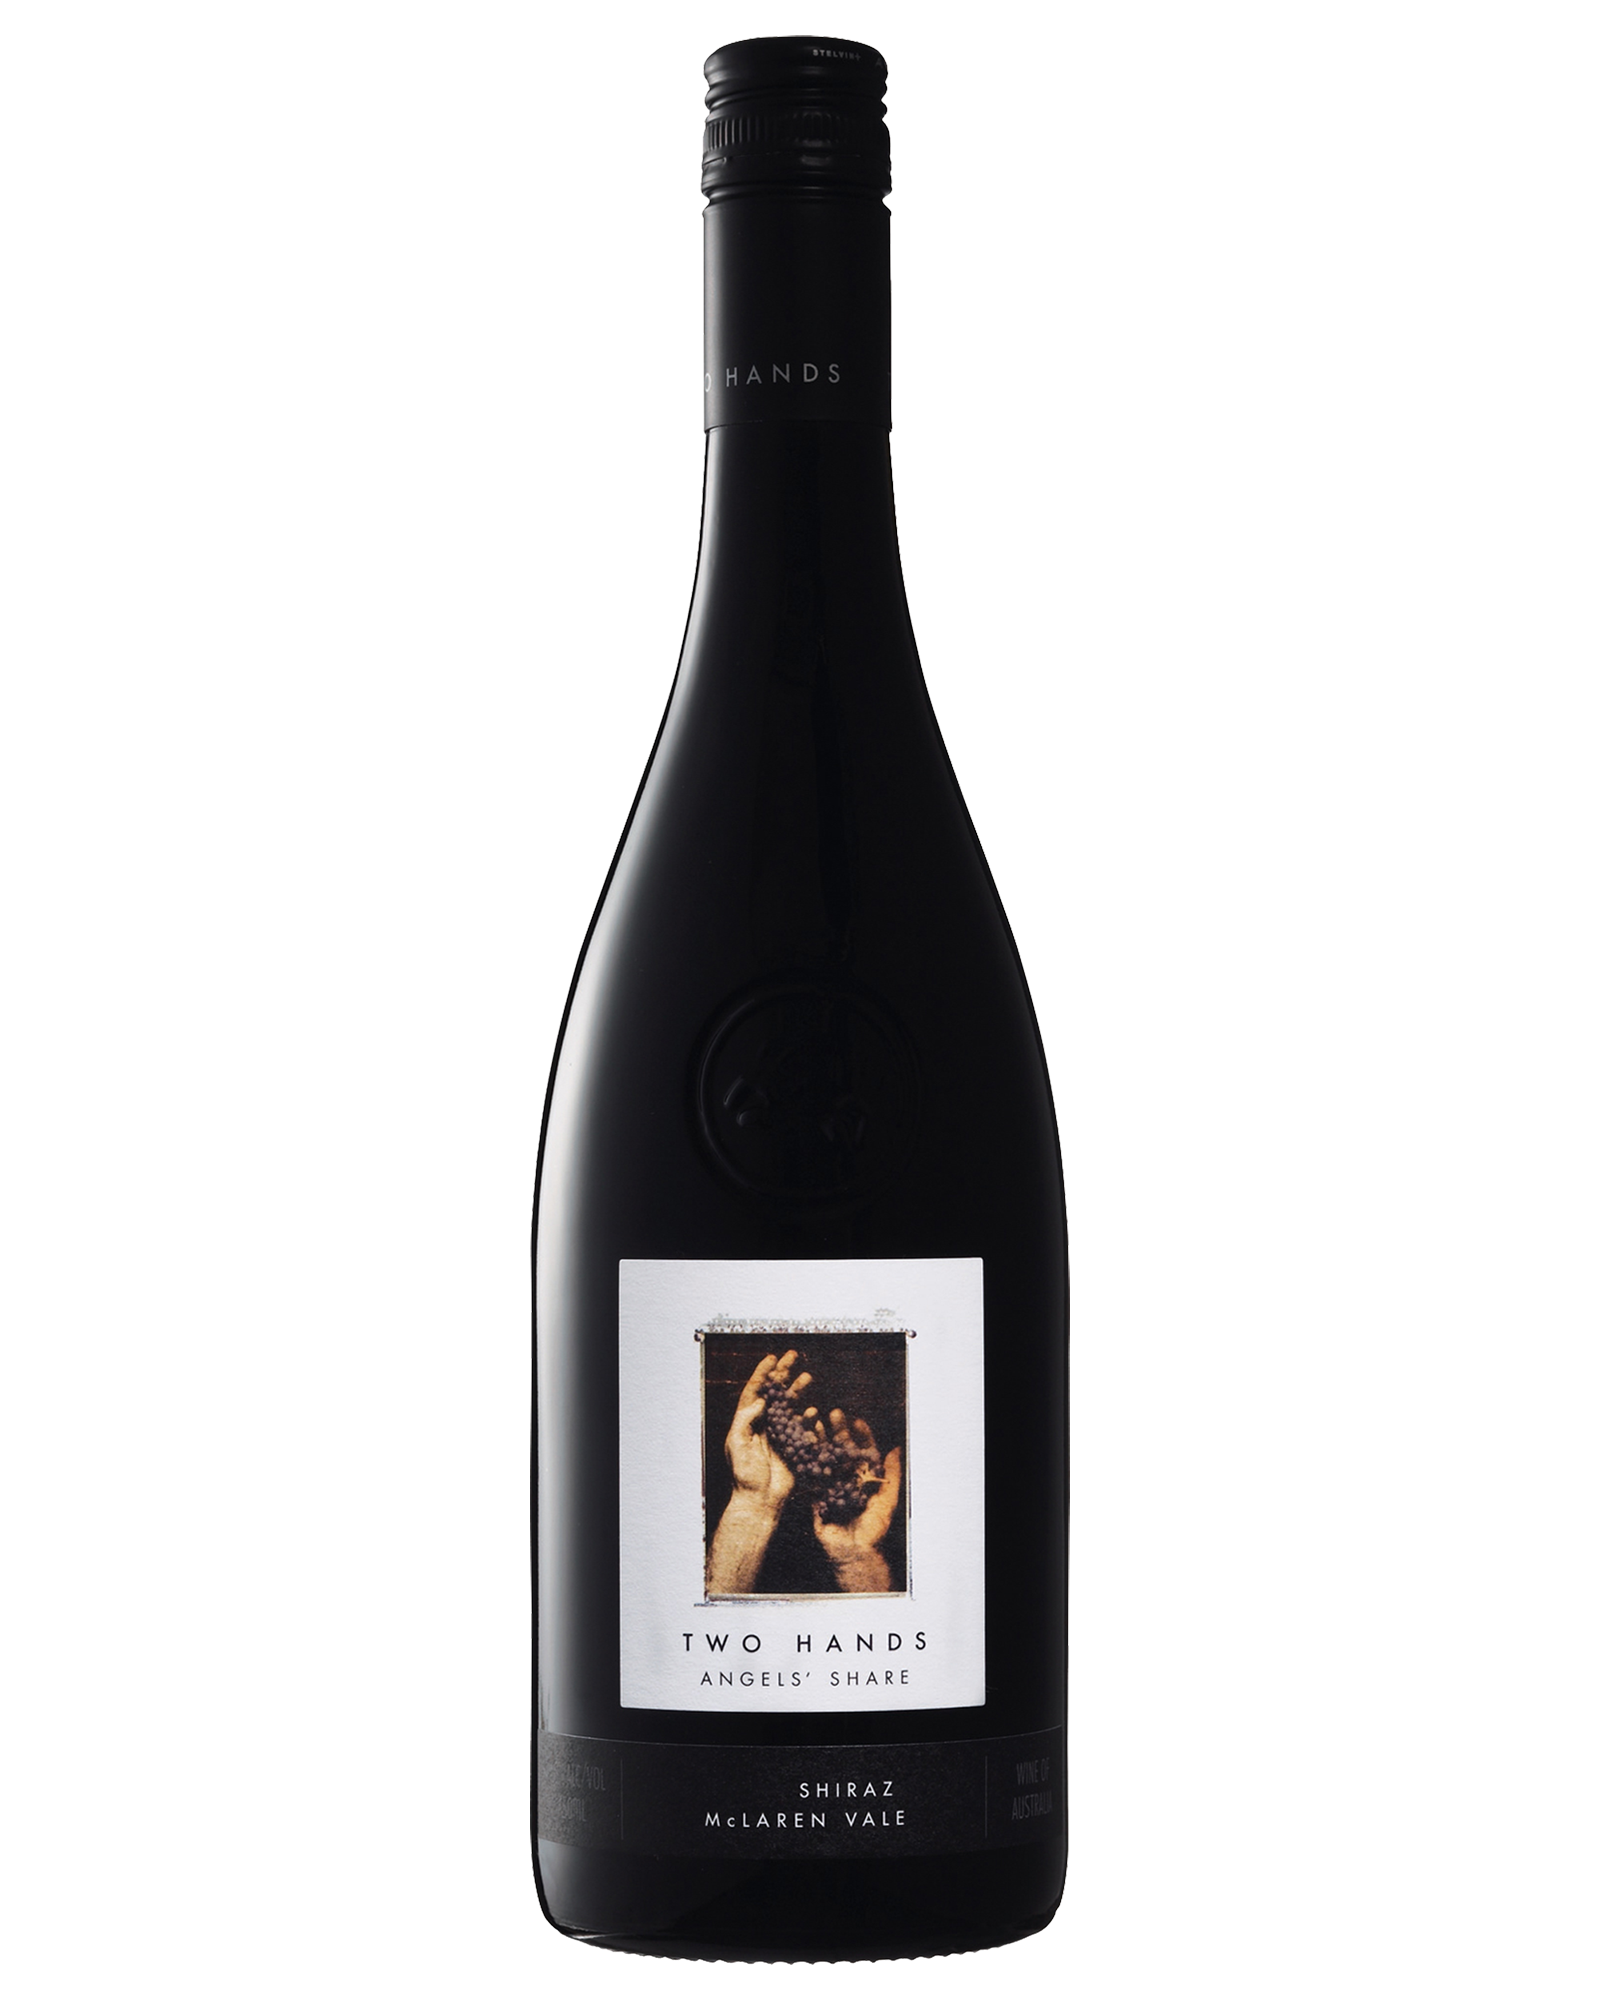 Two Hands Angels’ Share Shiraz 2012